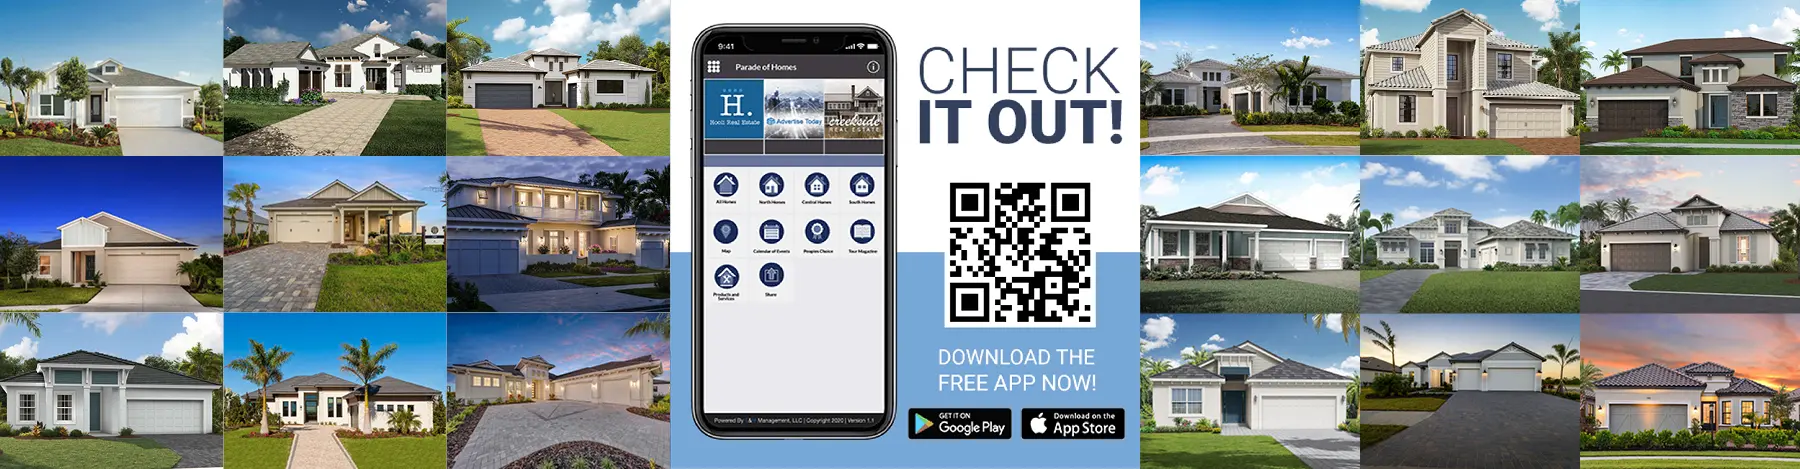 Download our Free app